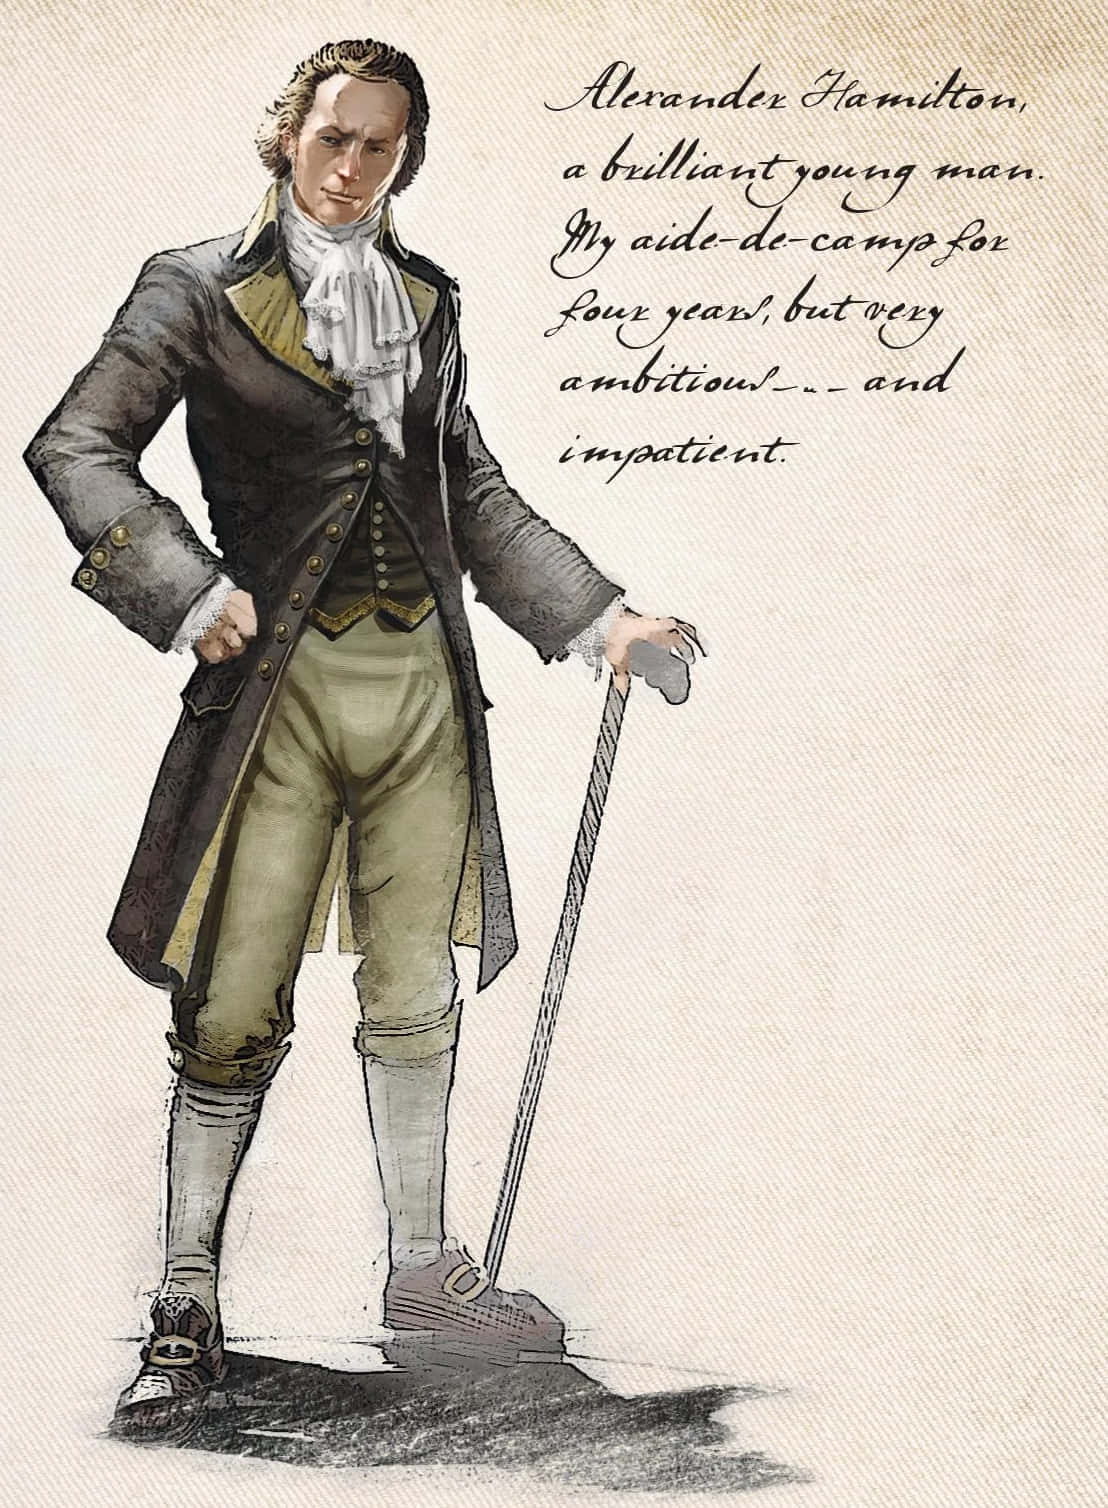 Alexander Hamilton, Founding Father of the United States